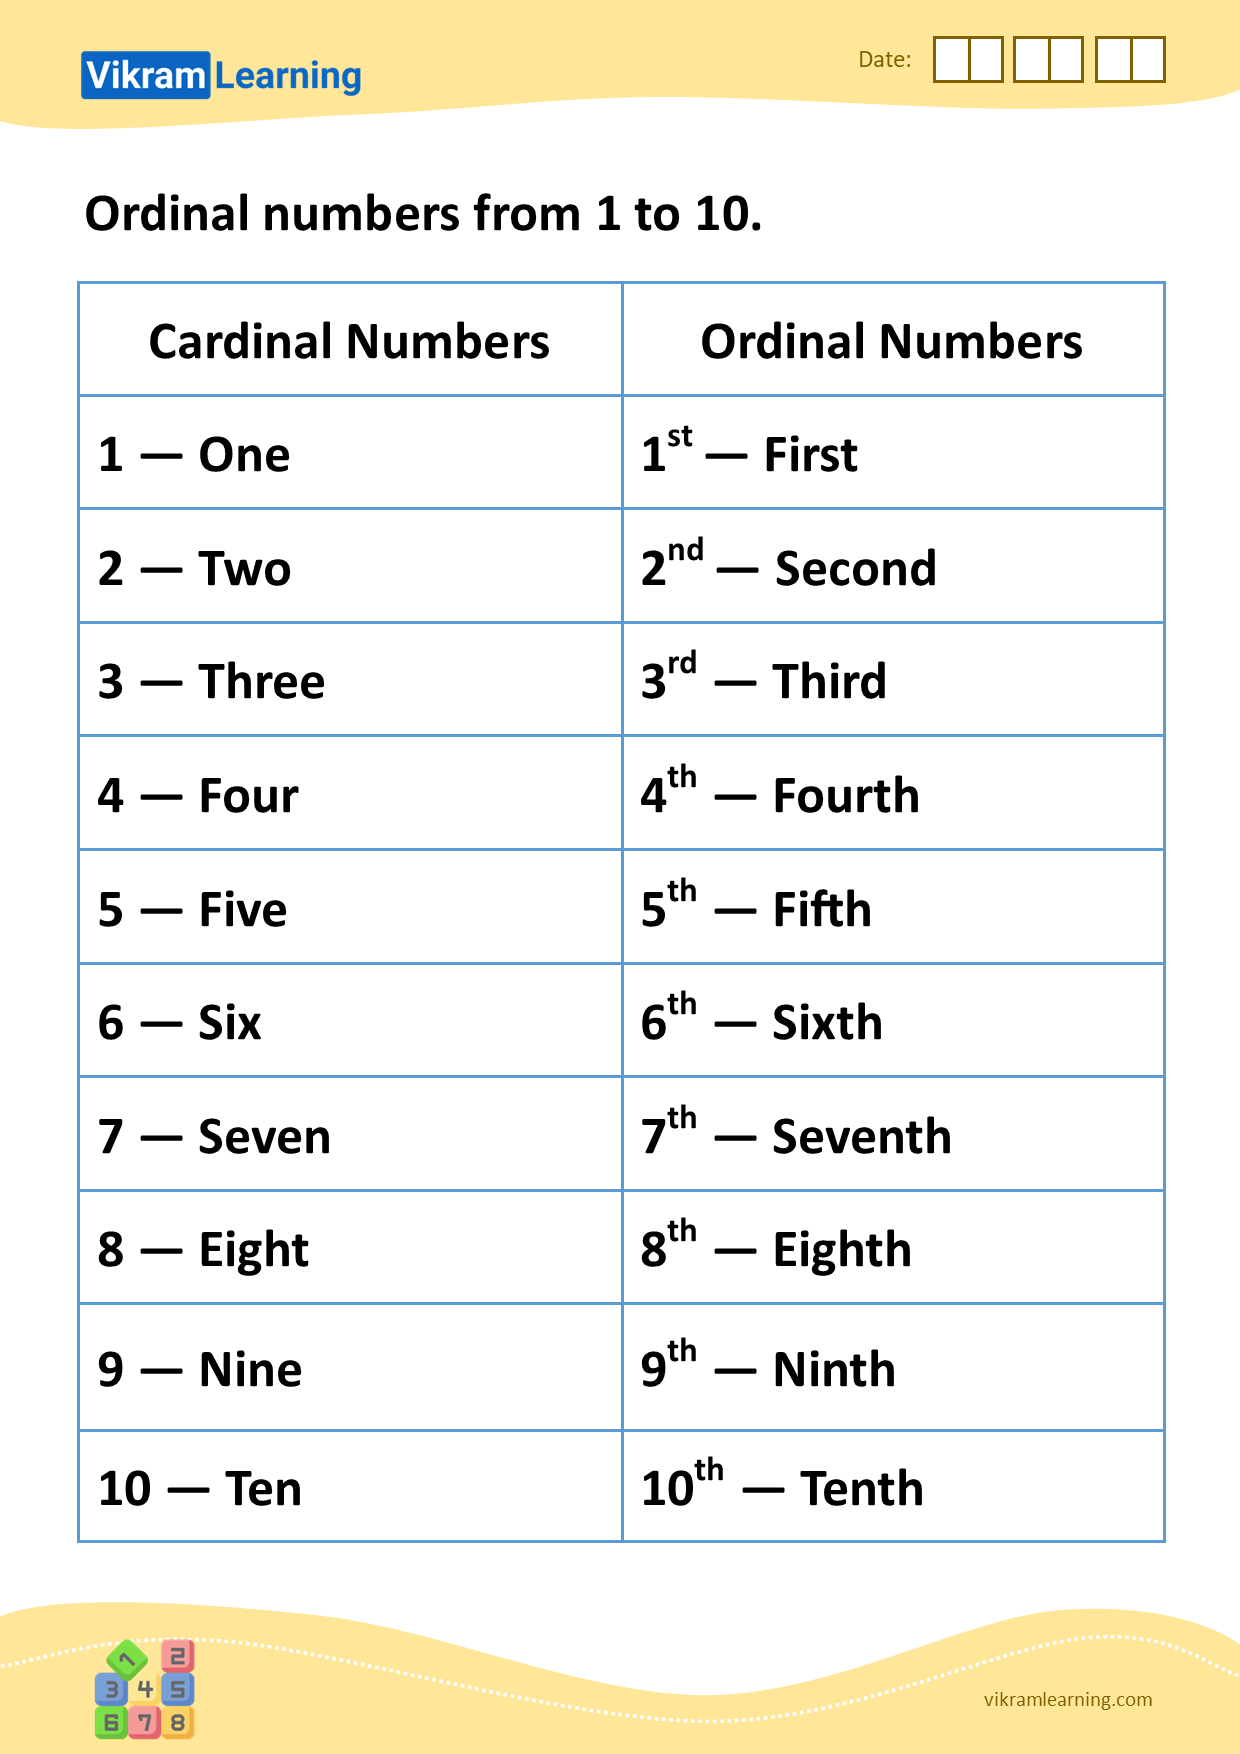 download-ordinal-numbers-from-1-to-10-worksheets-vikramlearning